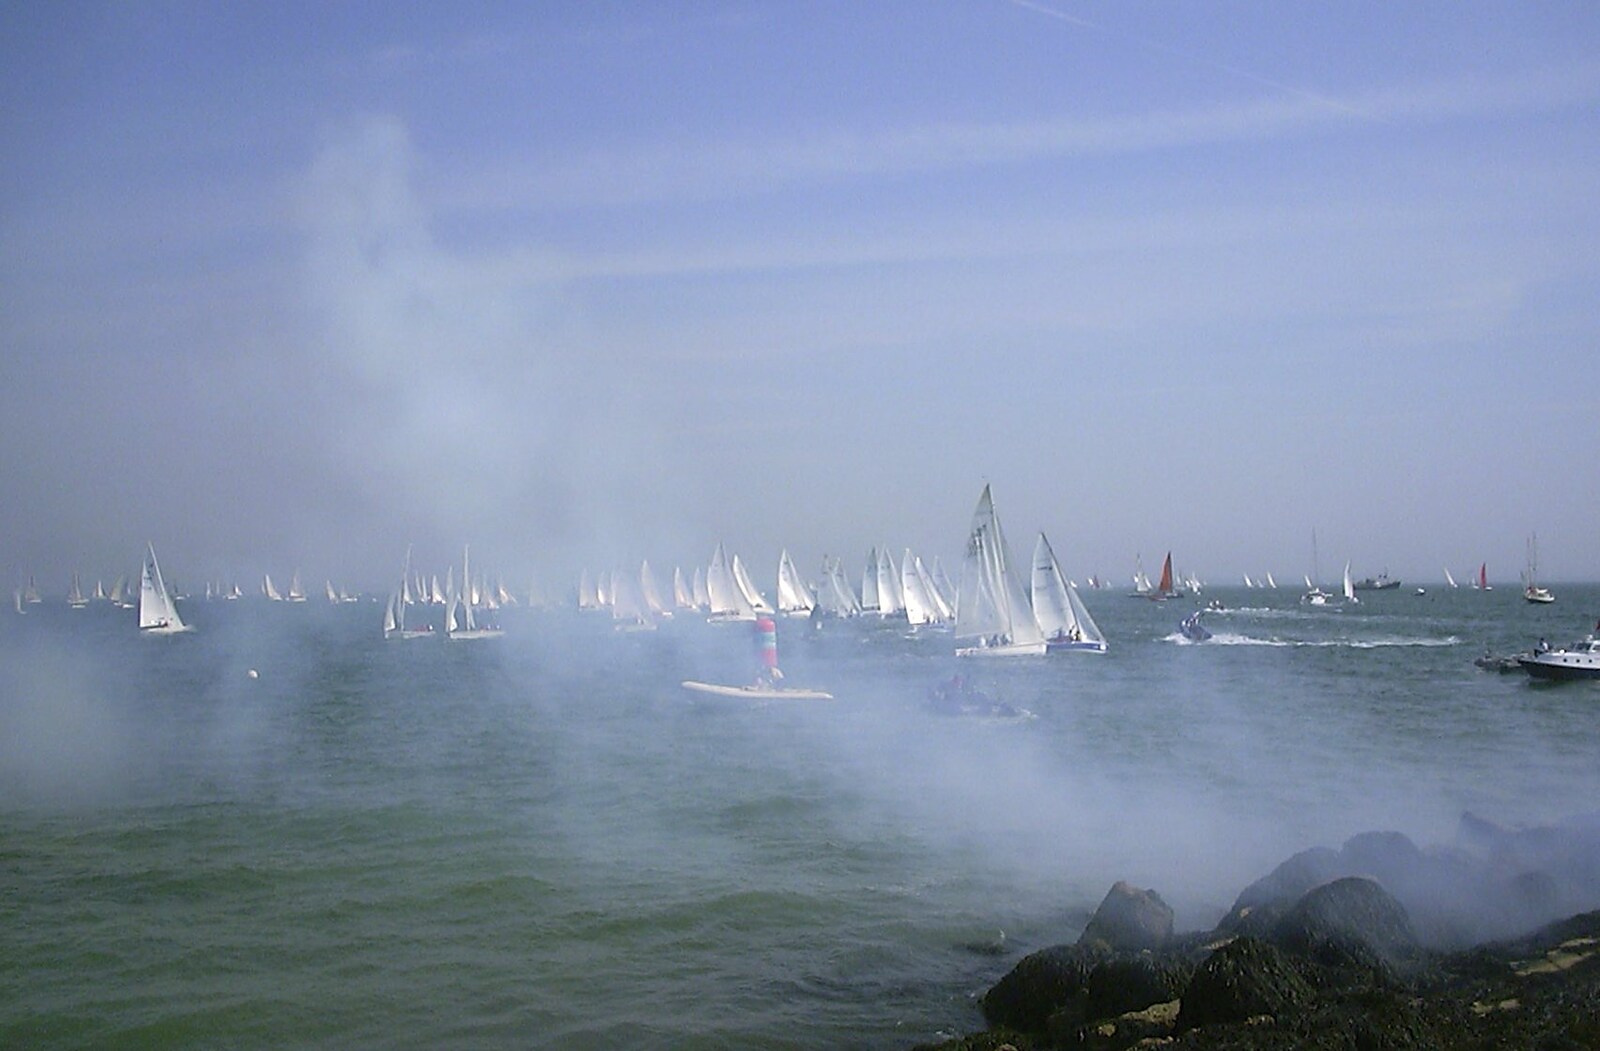 Smoke from a starting gun drifts over the water from Cowes Weekend, Cowes, Isle of Wight - 7th August 2004